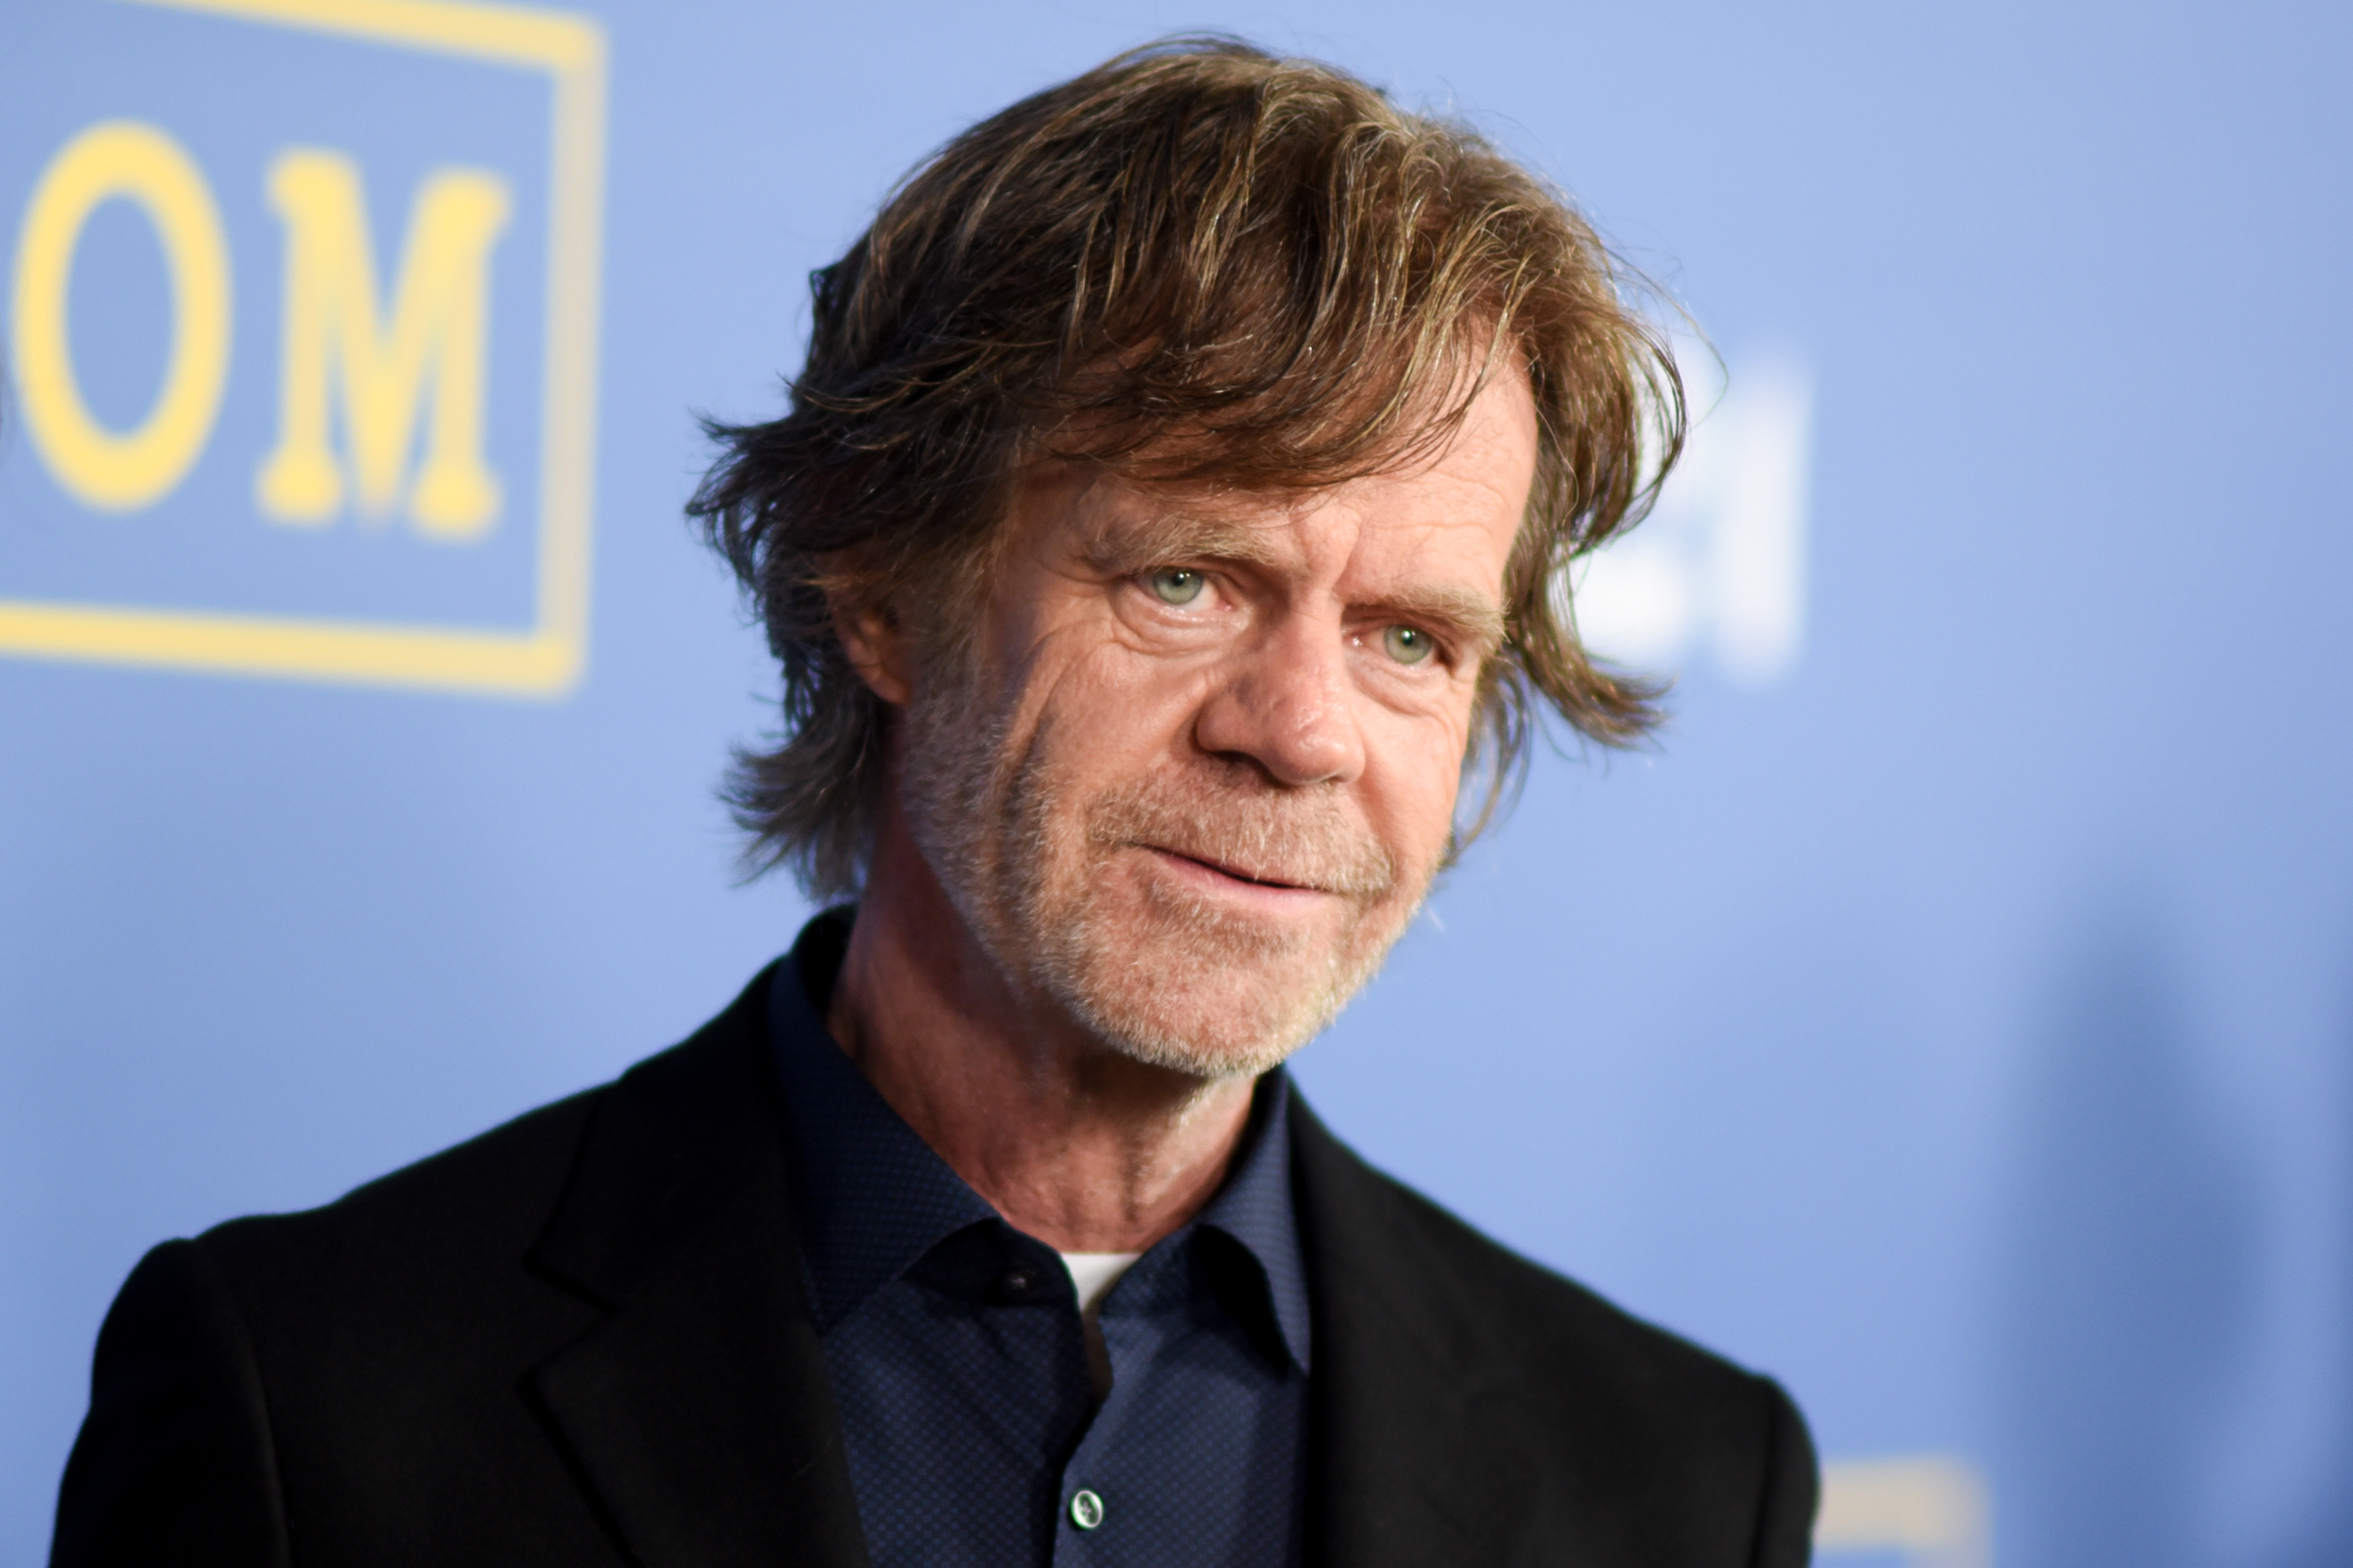 William H Macy Wallpaper Image Photos Pictures Background